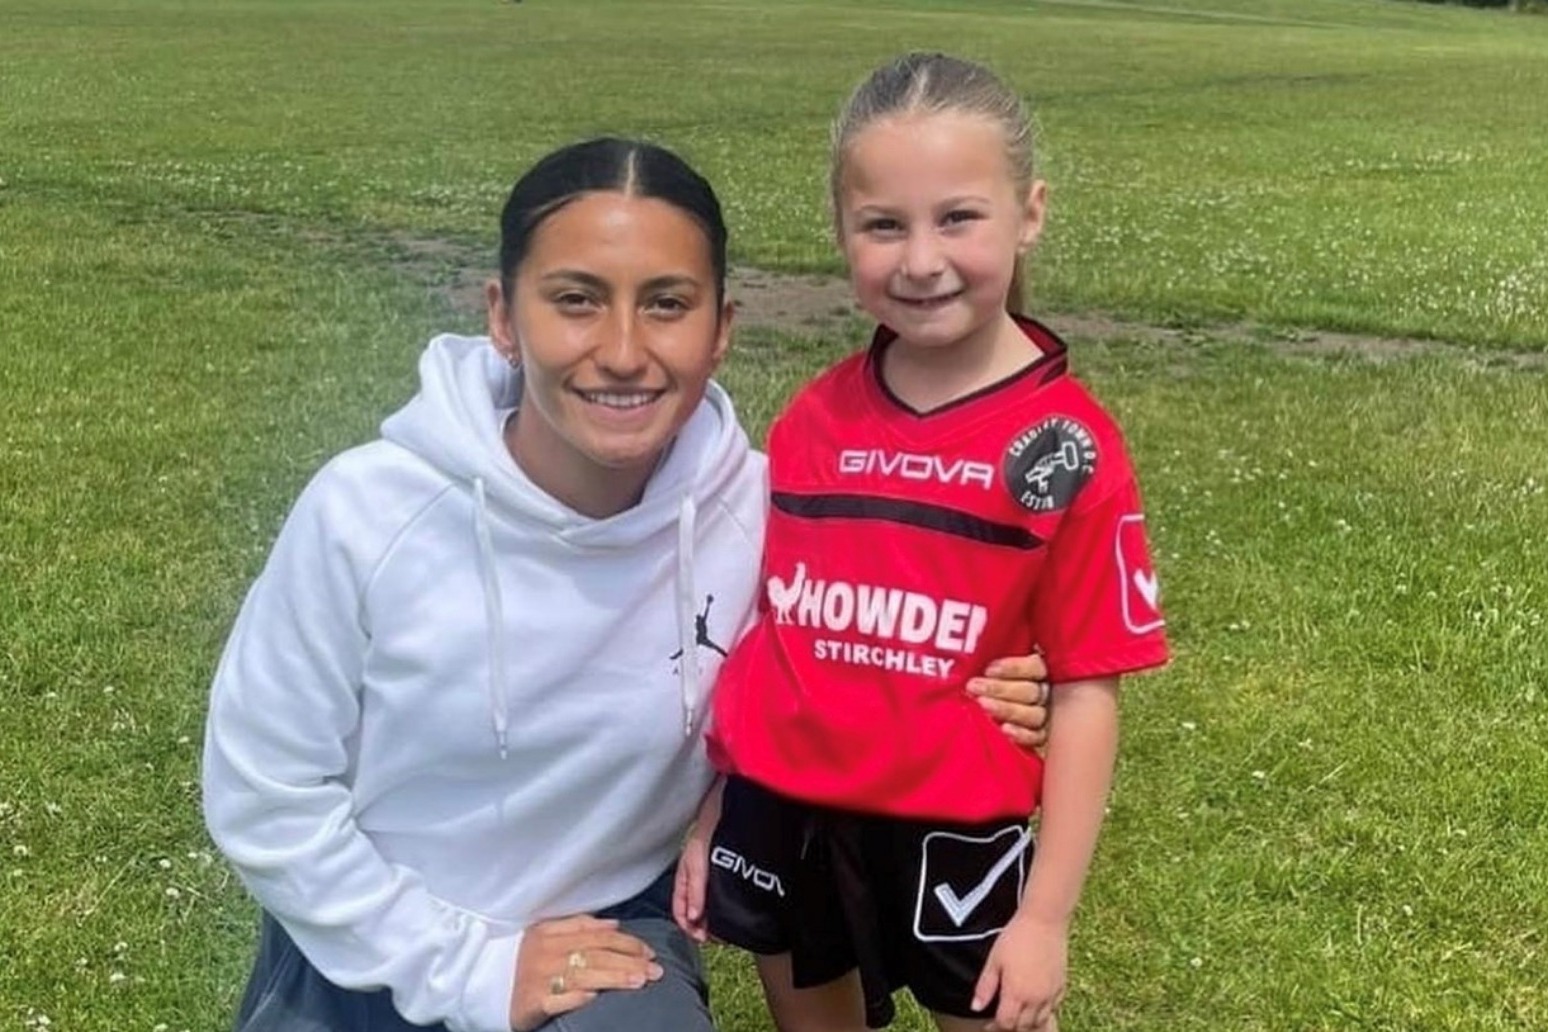 Six-year-old aspiring footballer tells Lioness ‘I want one of these medals’ 